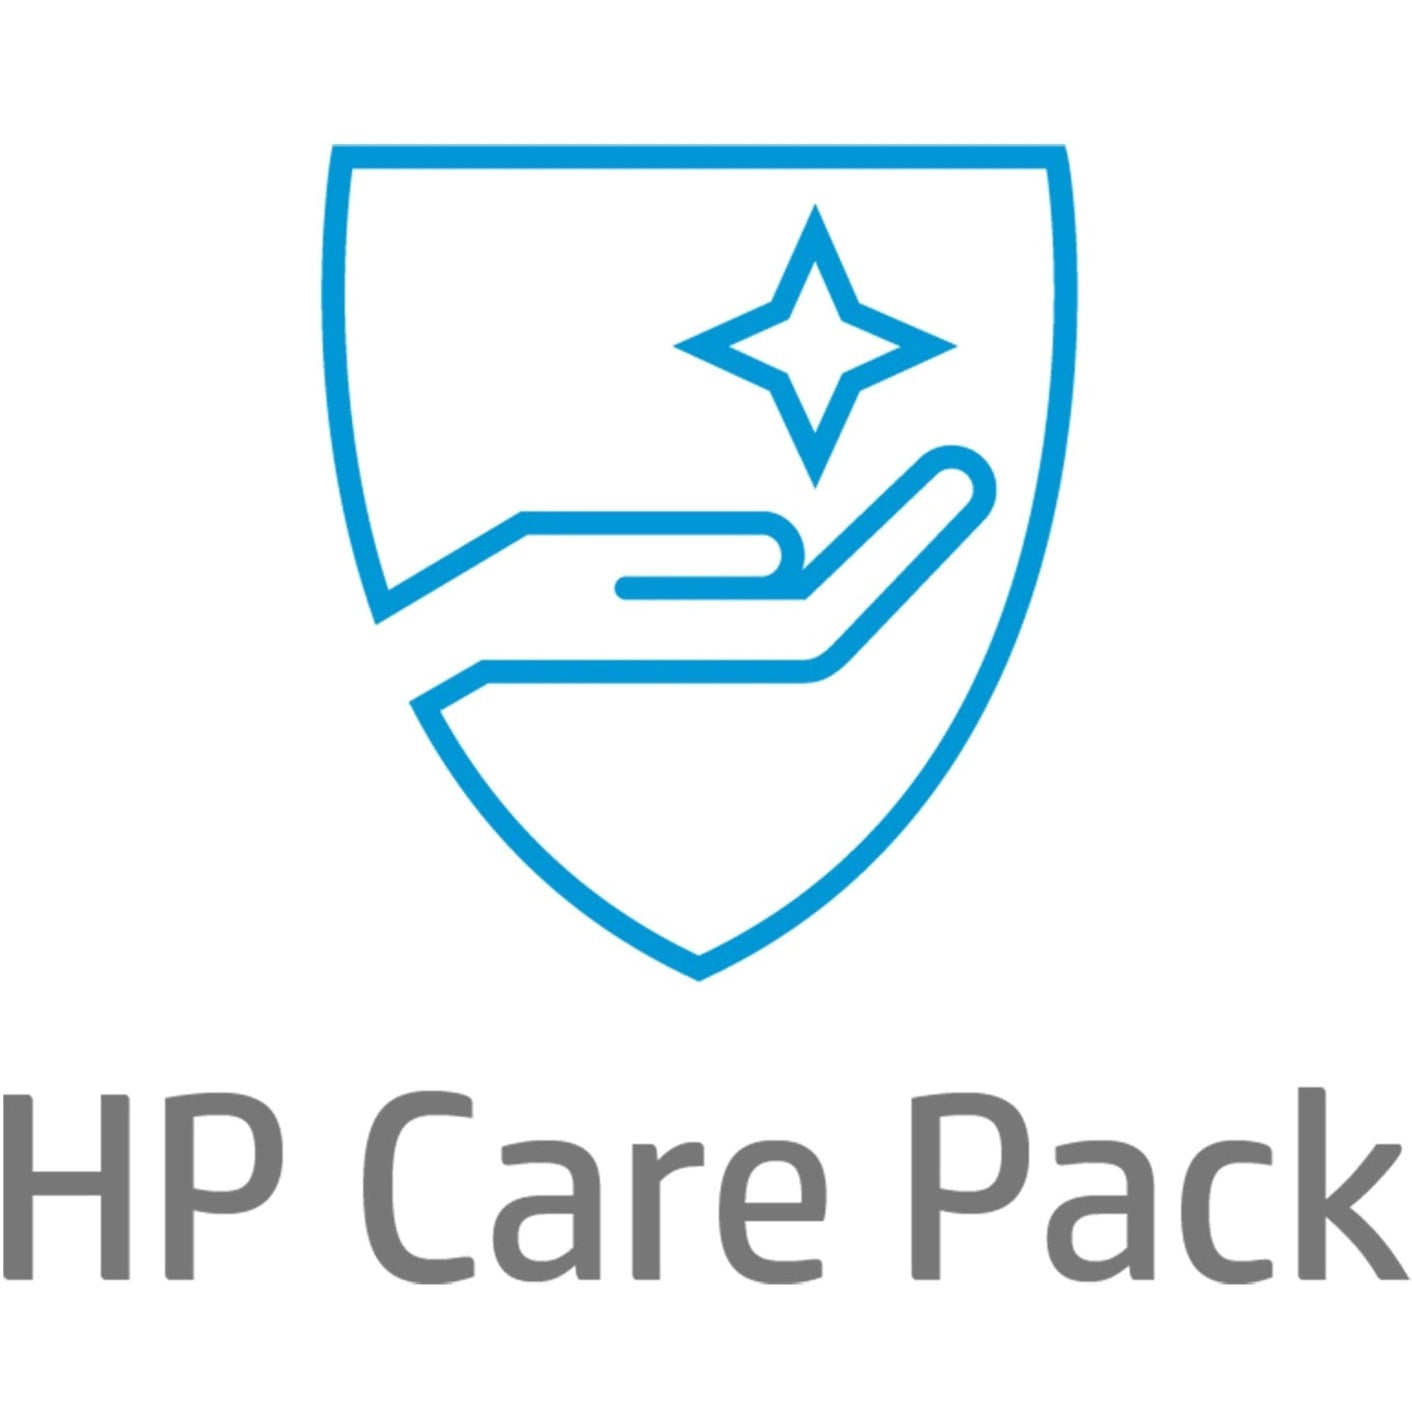 HP Care Pack Hardware Support for Travelers with Defective Media Retention - 1 Year - Service (UL702PE)